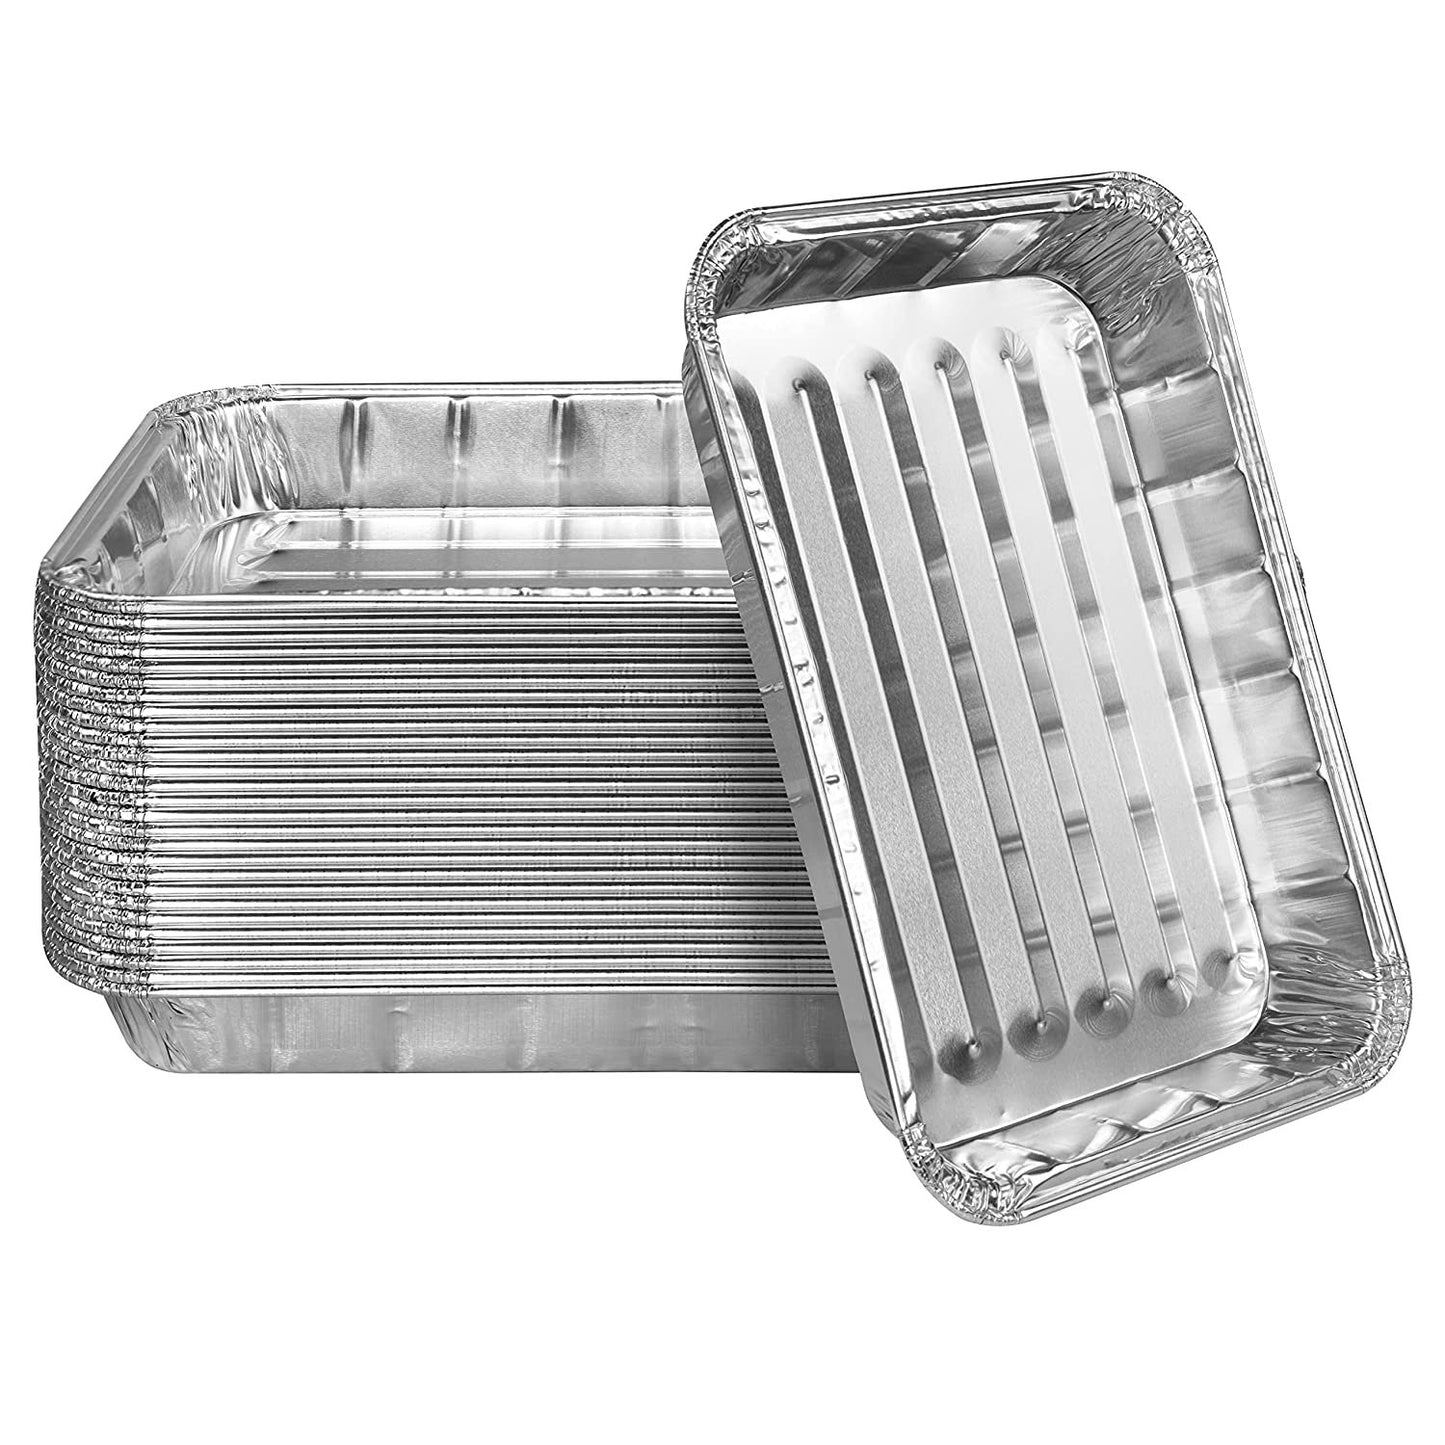 8x8 Foil Pans with Lids (10 Pack) 8 Inch Square Aluminum Pans with Covers -  Foil Pans and Foil Lids - Disposable Food Containers Great for Baking